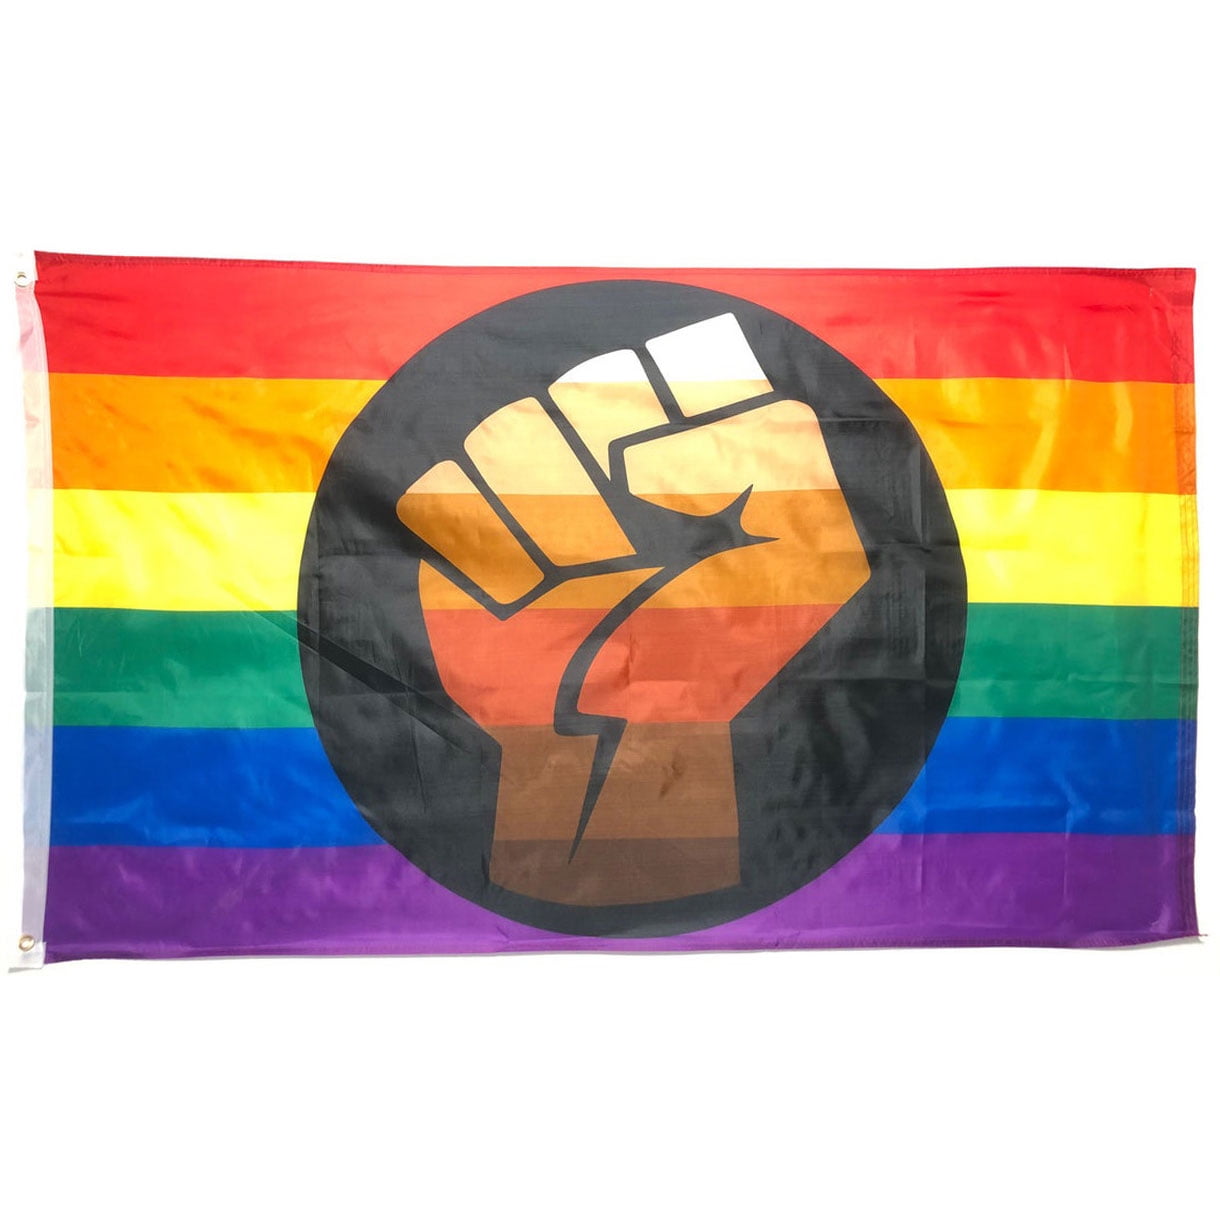 3’x 5’, Poly HD Printing Perfect for Showing Your Pride LGBT Community Support Inspired by Black Brown Philadelphia ENMOON BLM Pride Flag with Black Power Fist